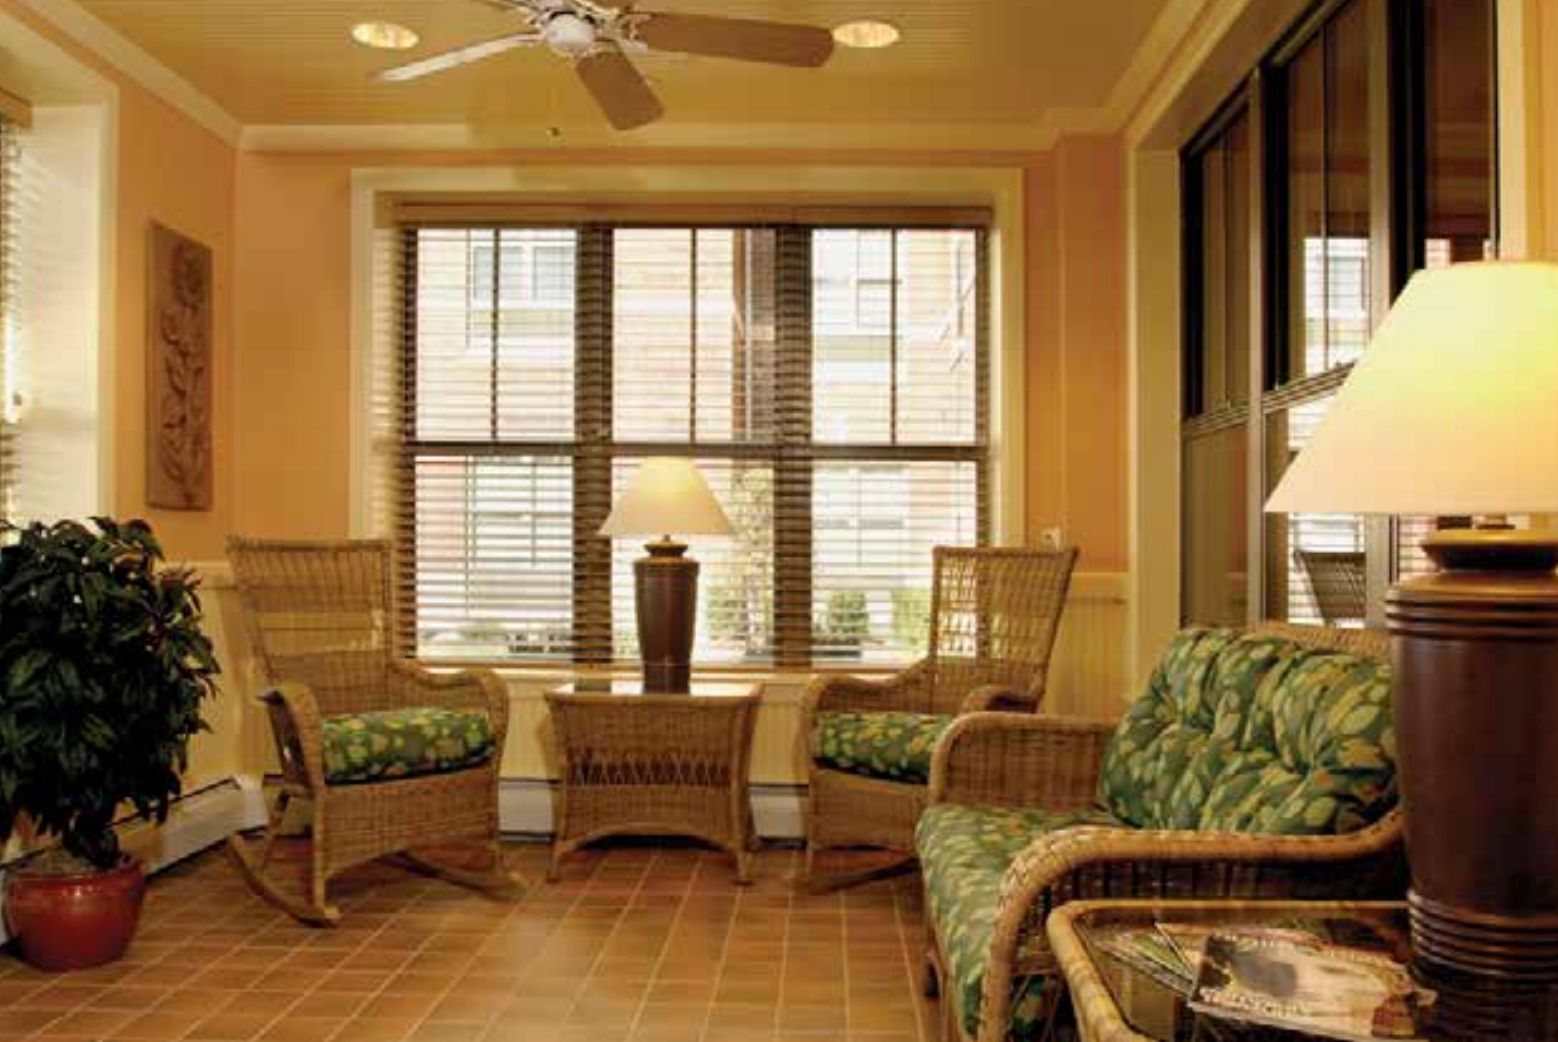 Interior view of Alexian Village Elk Grove senior living room with modern furniture and decor.